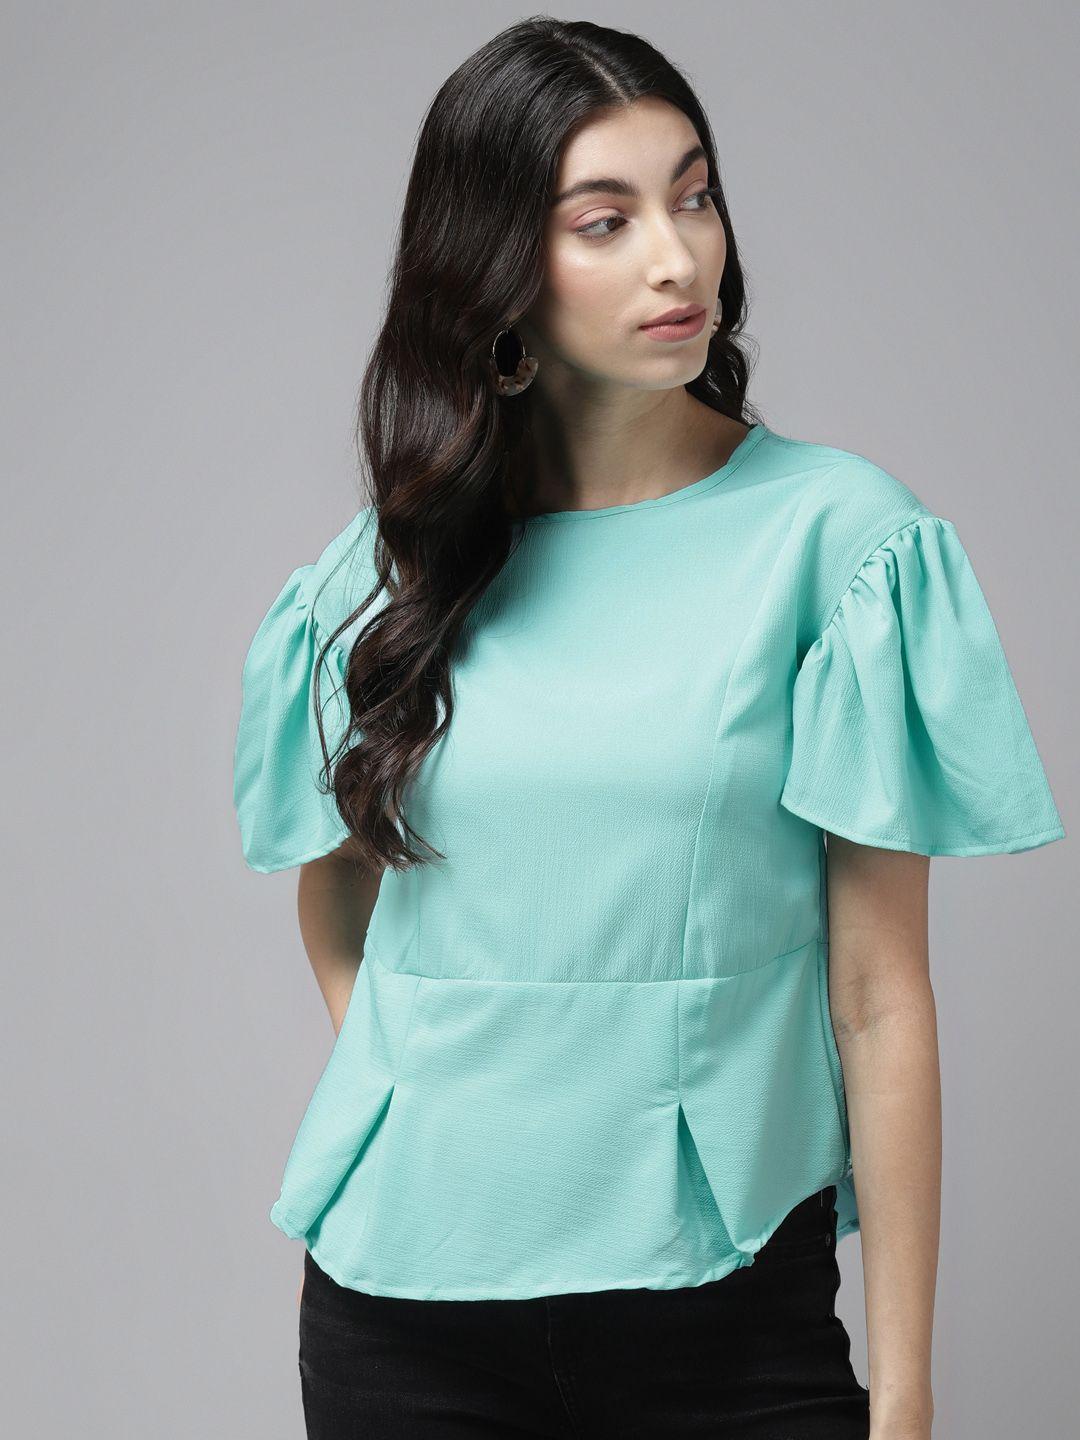 cayman-turquoise-blue-solid-flared-sleeves-a-line-top